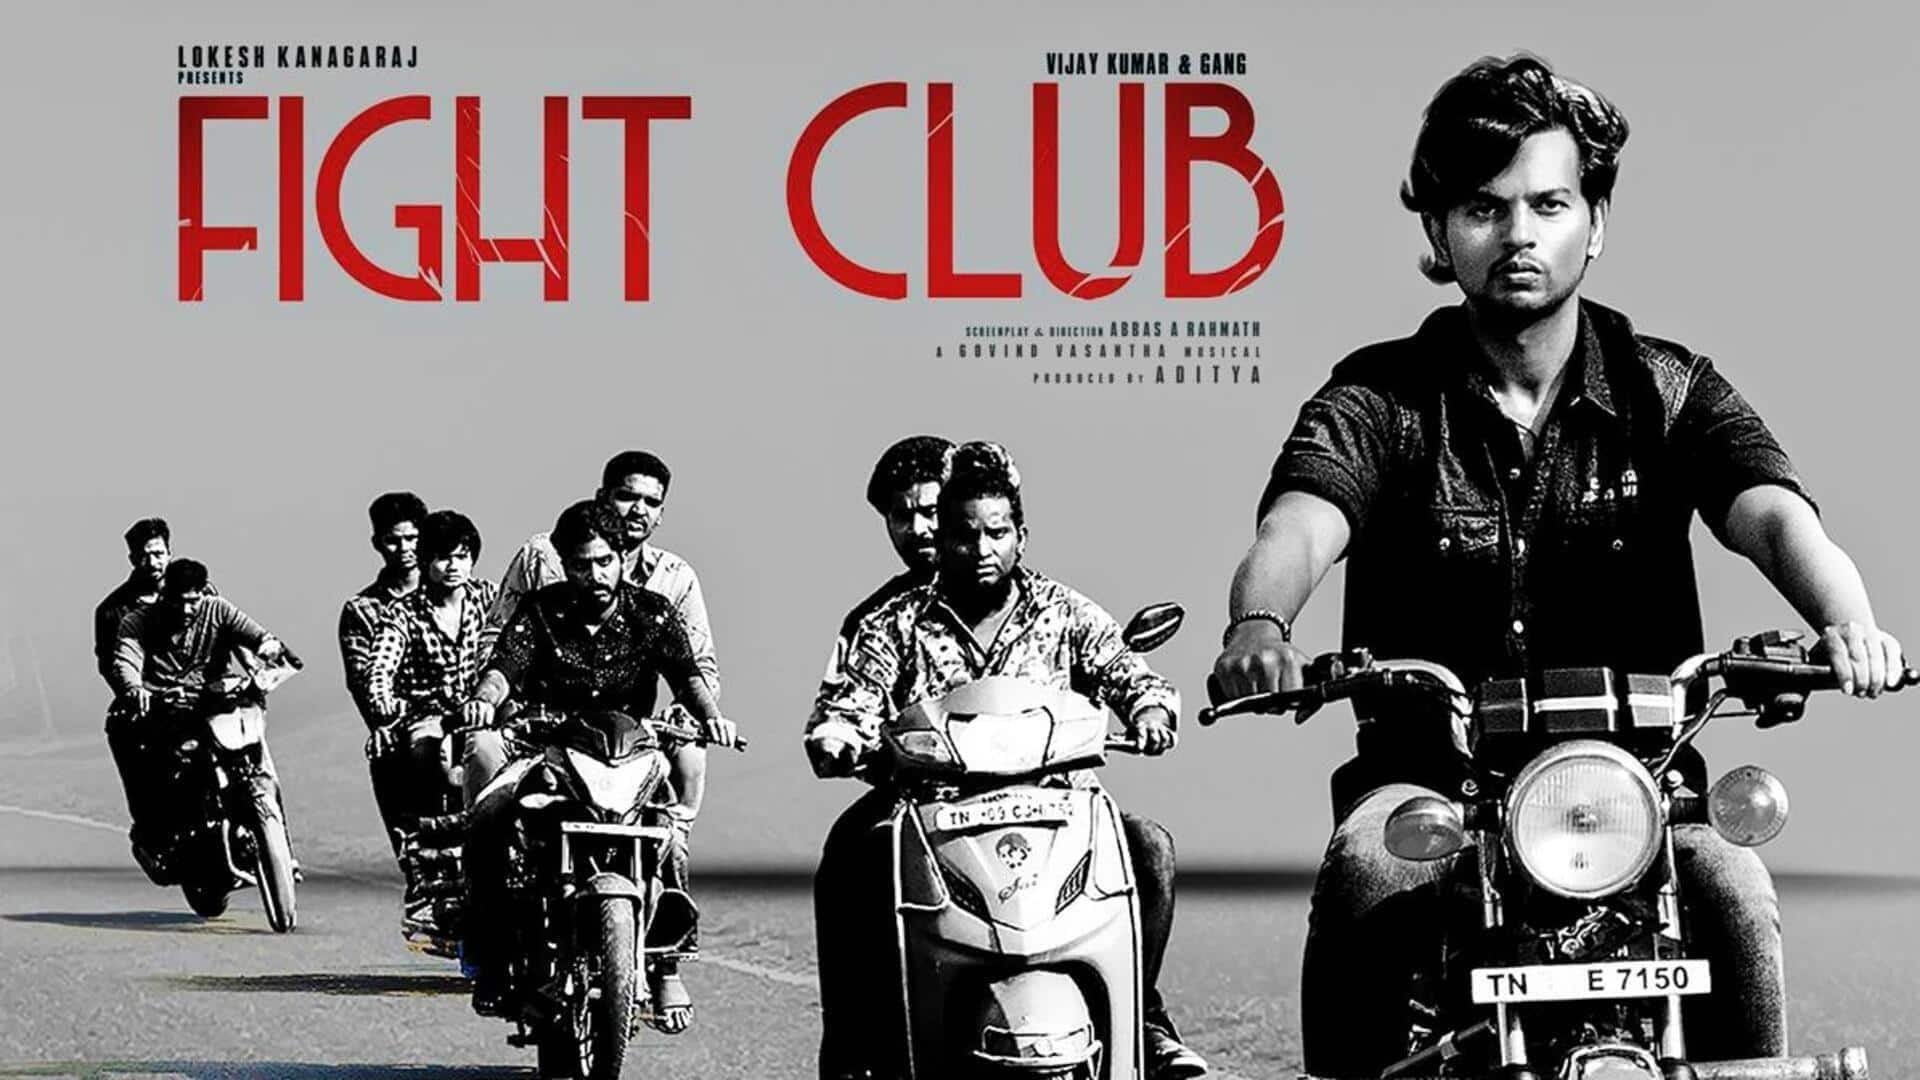 Box office collection: 'Fight Club' fights for stability